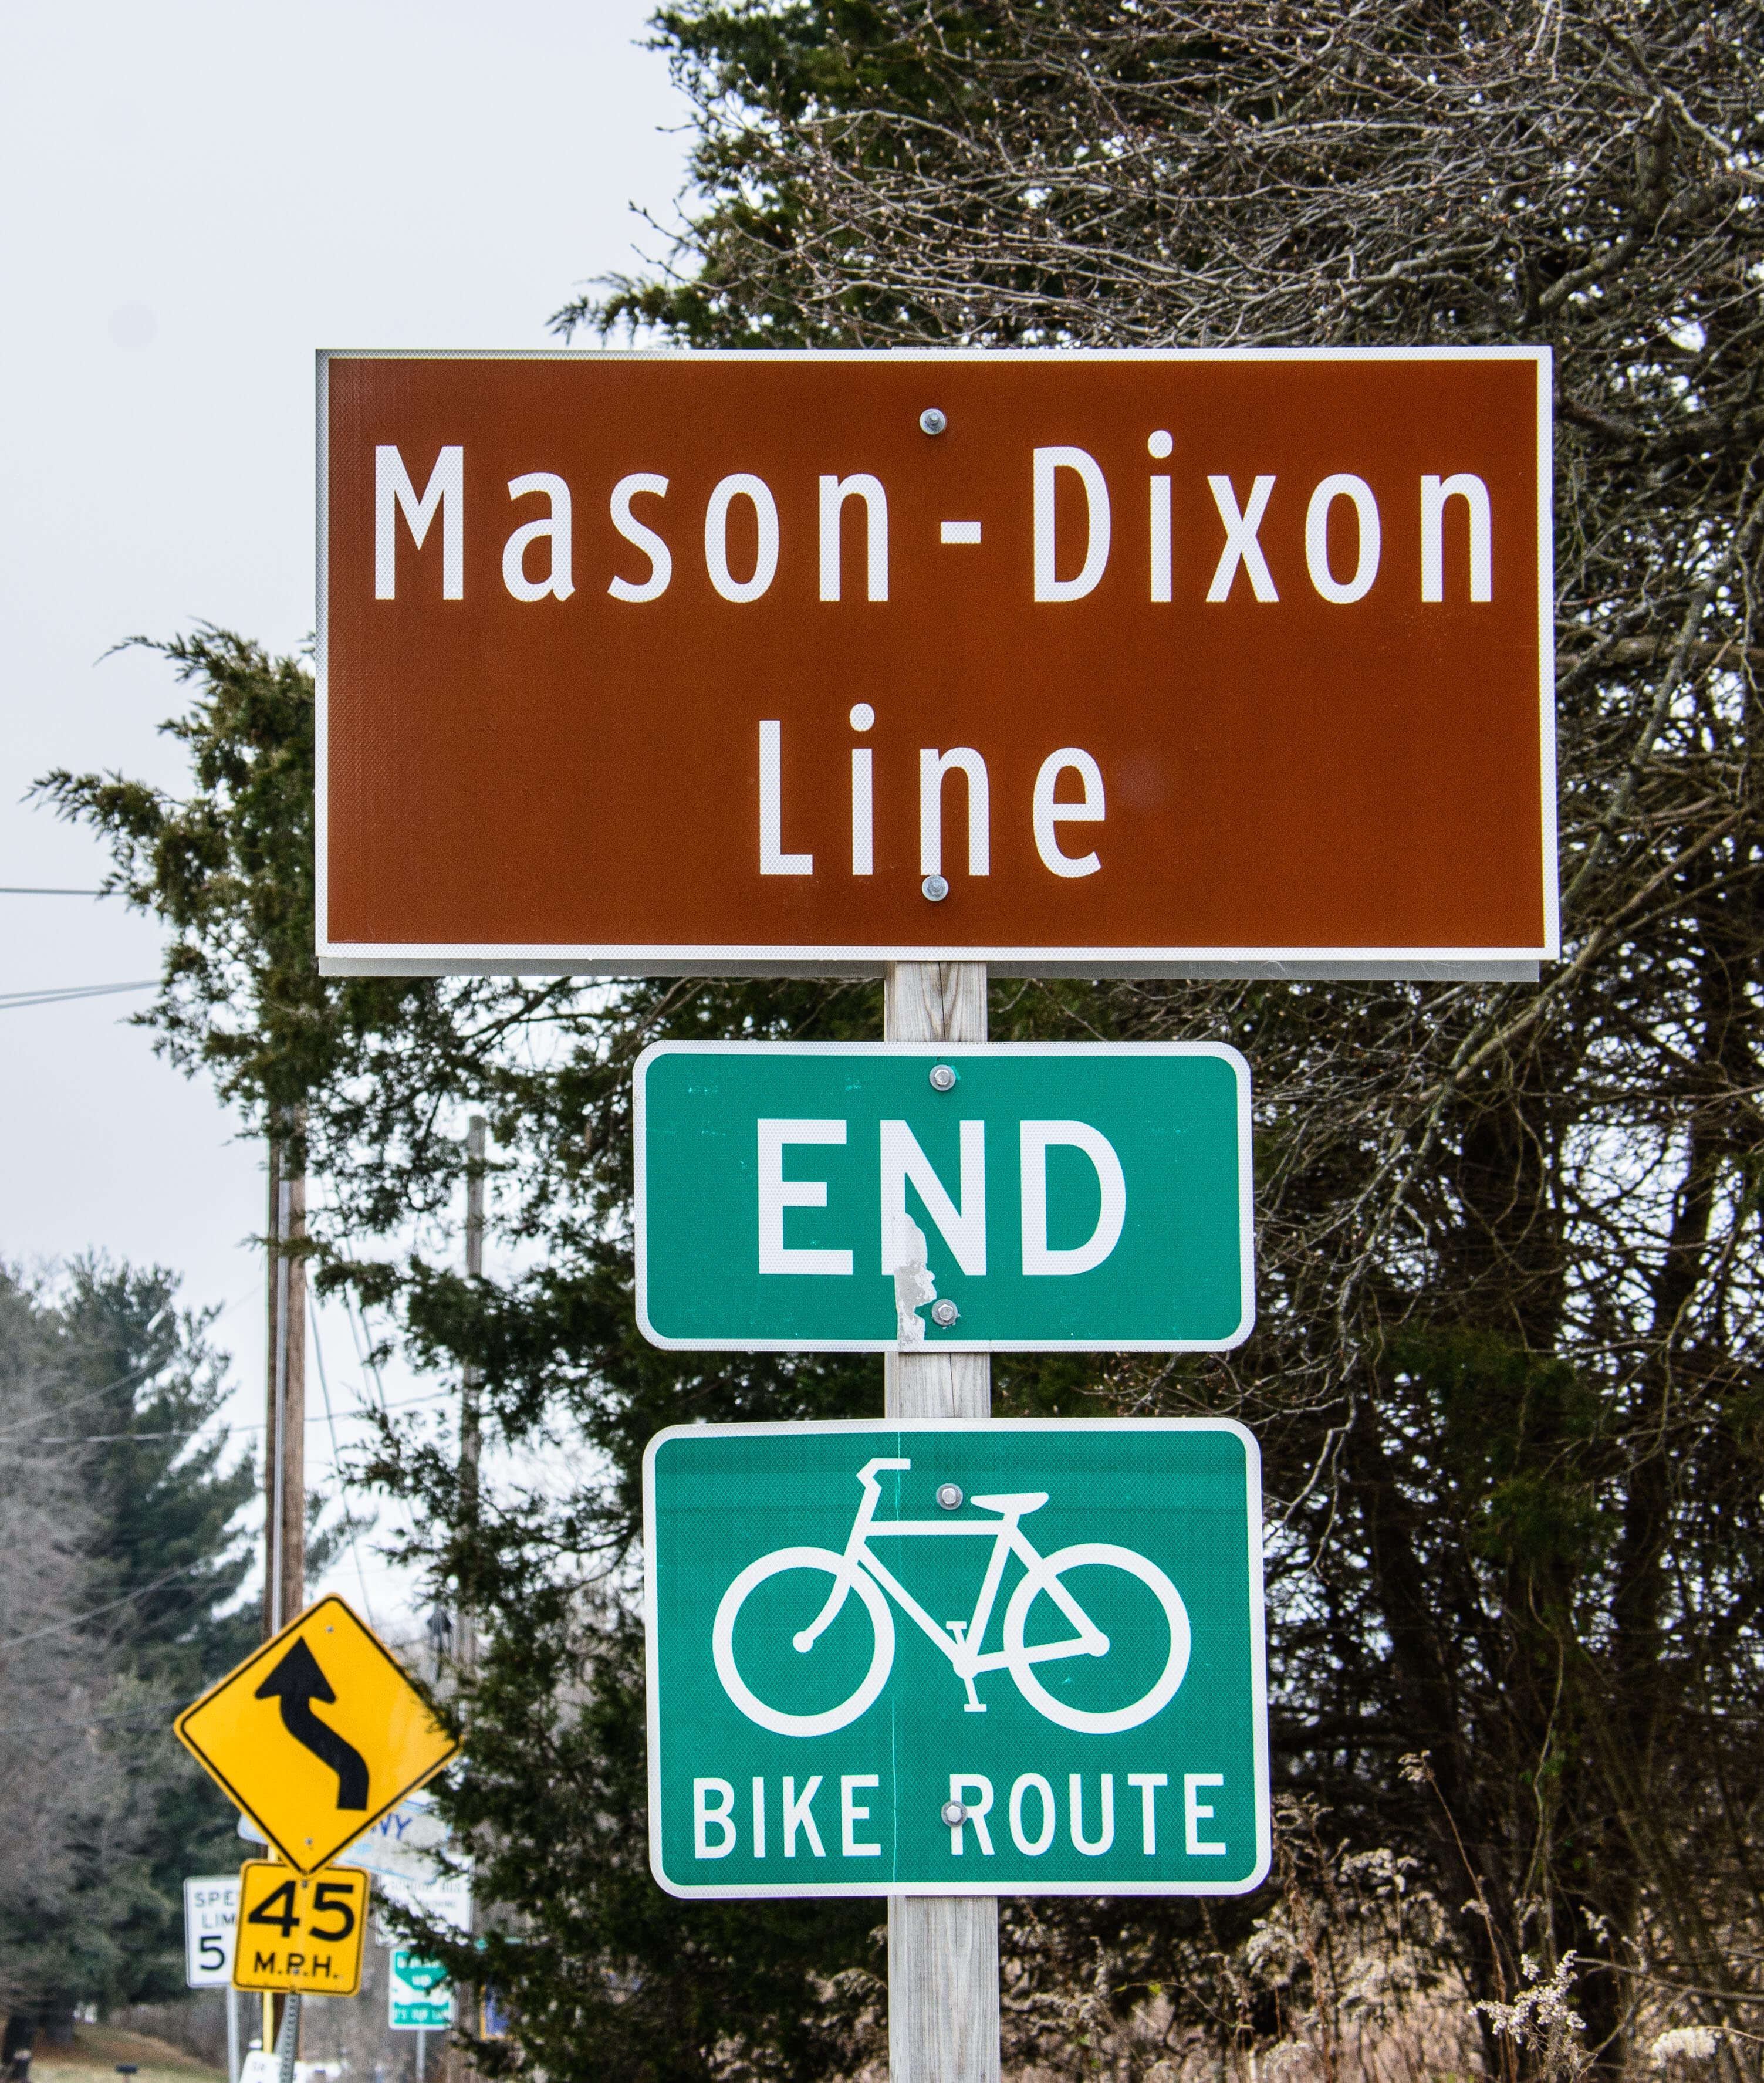 Is Cape May Below the Mason-Dixon Line?